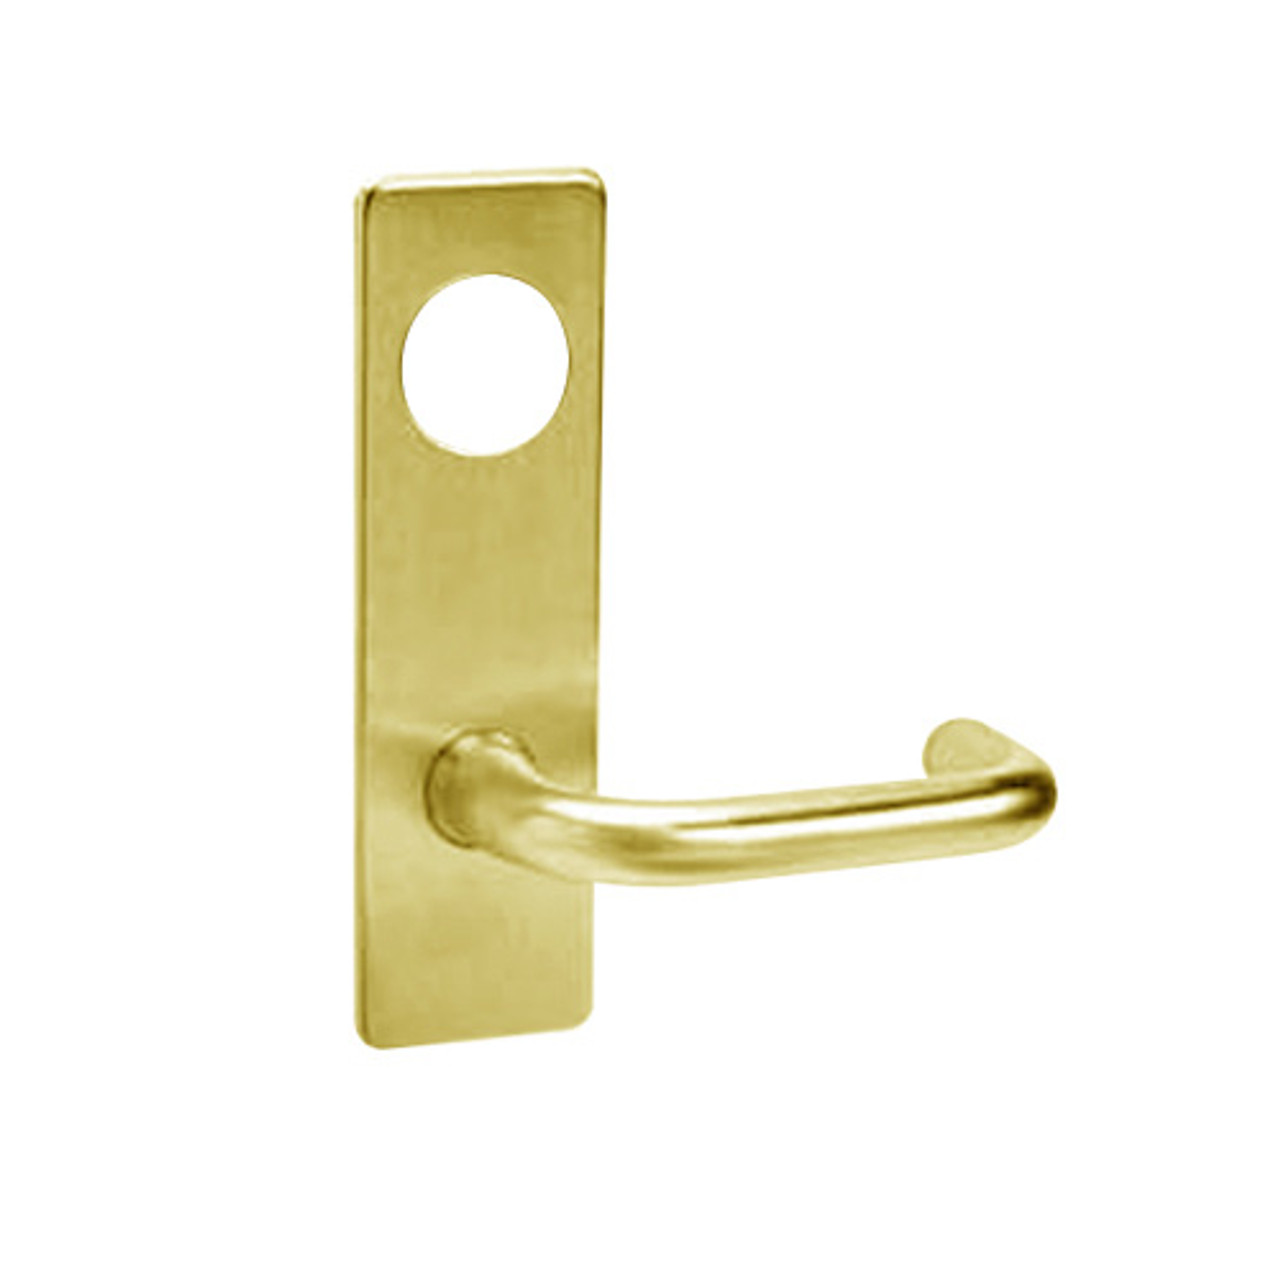 ML2065-LSP-605-M31 Corbin Russwin ML2000 Series Mortise Dormitory Trim Pack with Lustra Lever in Bright Brass